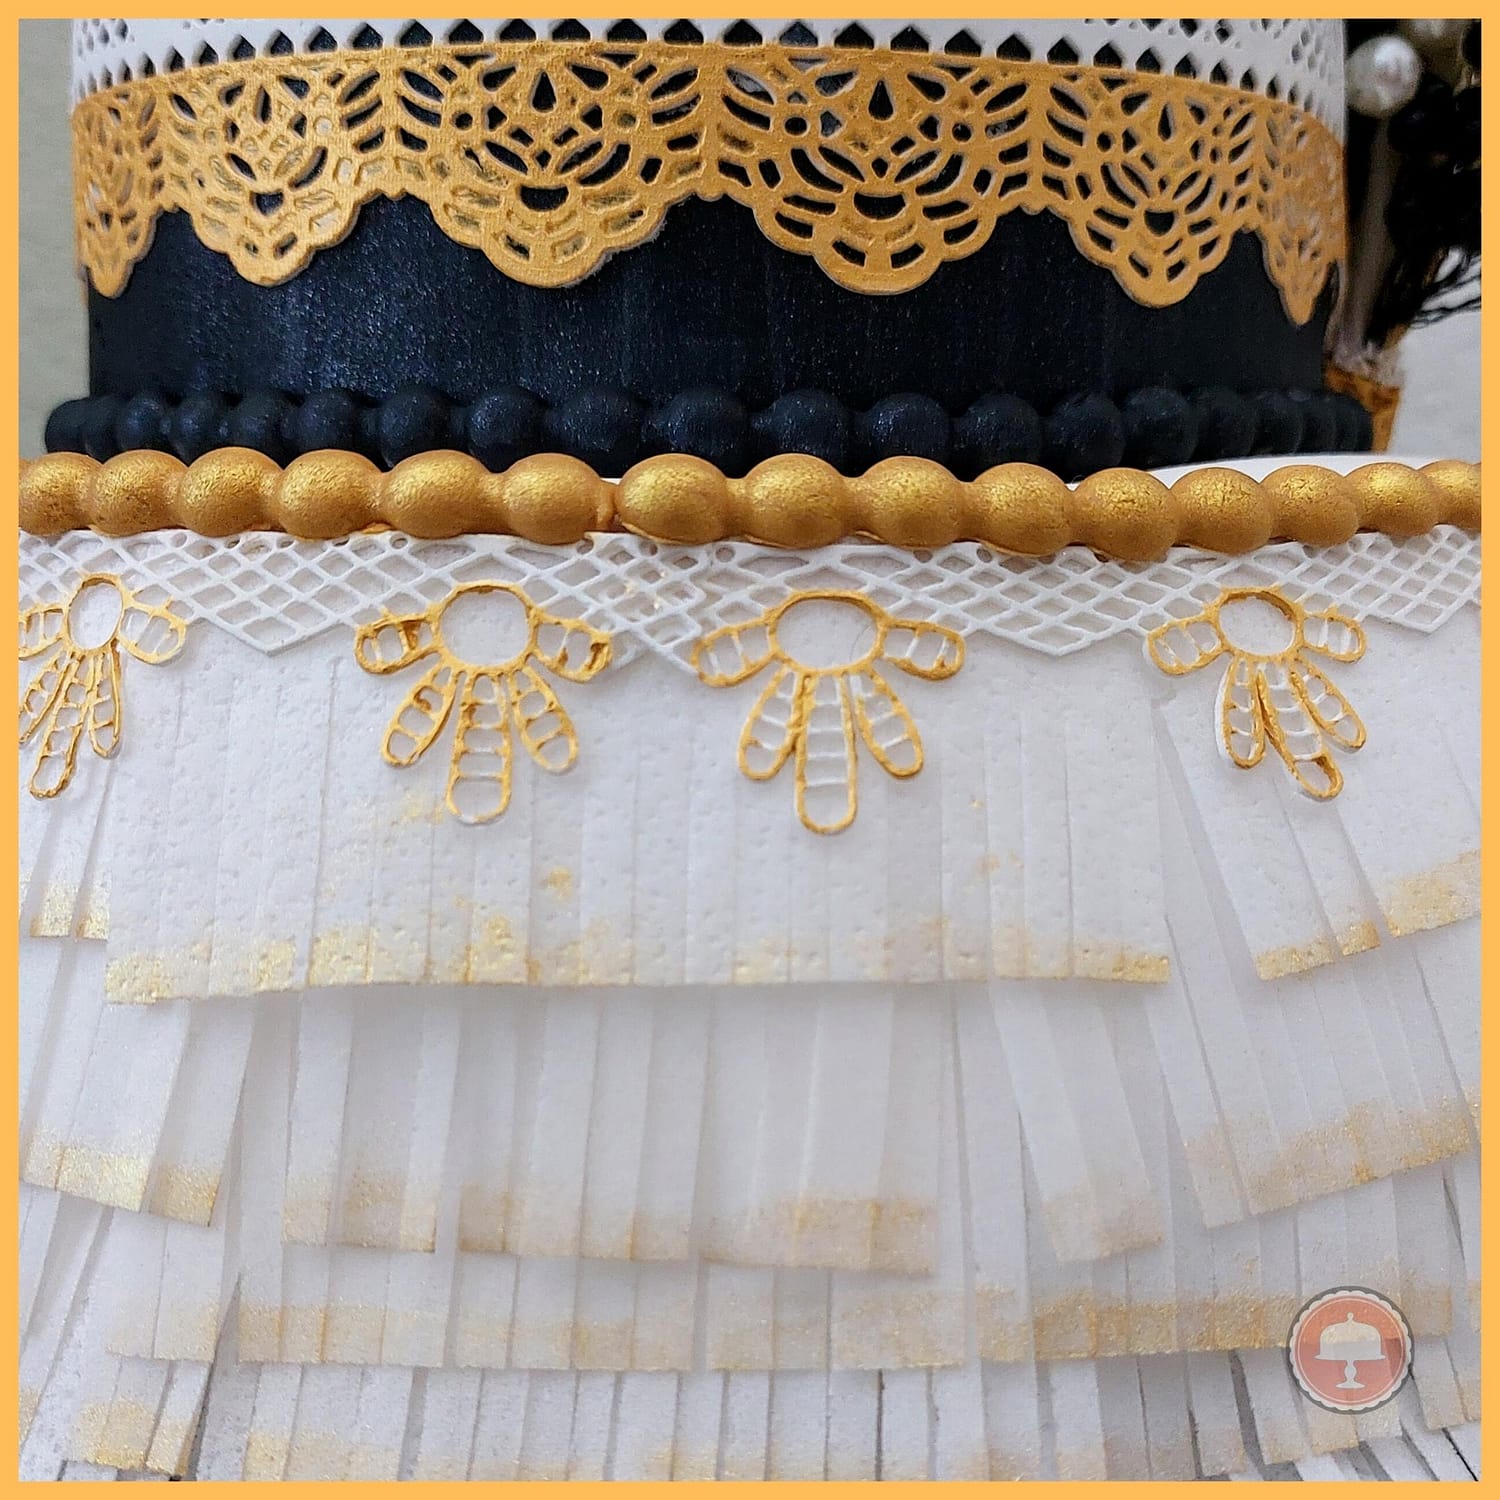 great gatsby cake roaring 20's cake fully fondant covered cake with wafer paper luster dust and edible lace